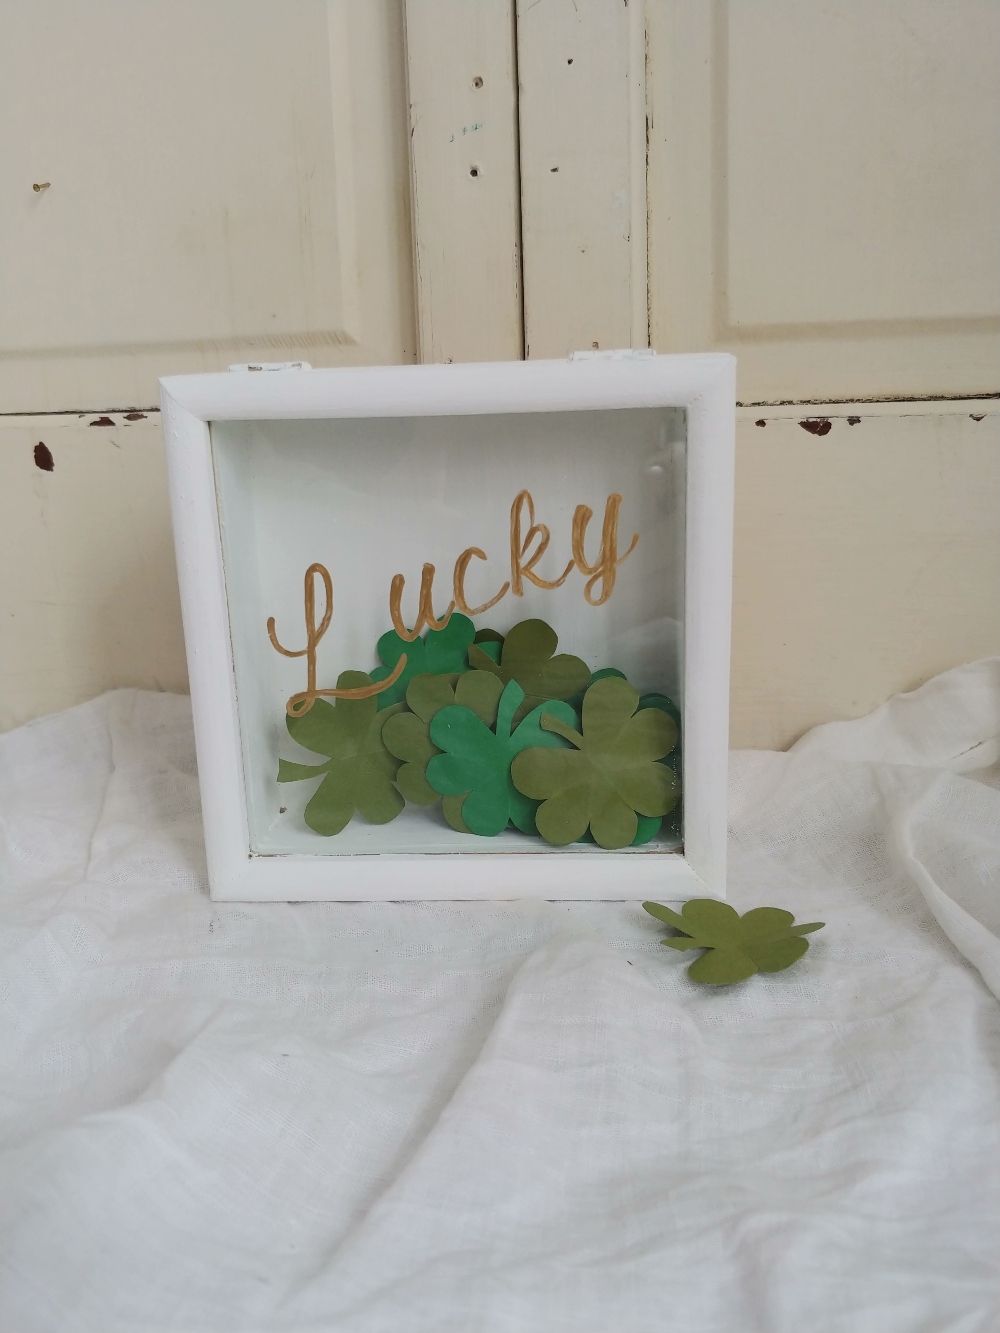 Shadow box for St. Patty's day